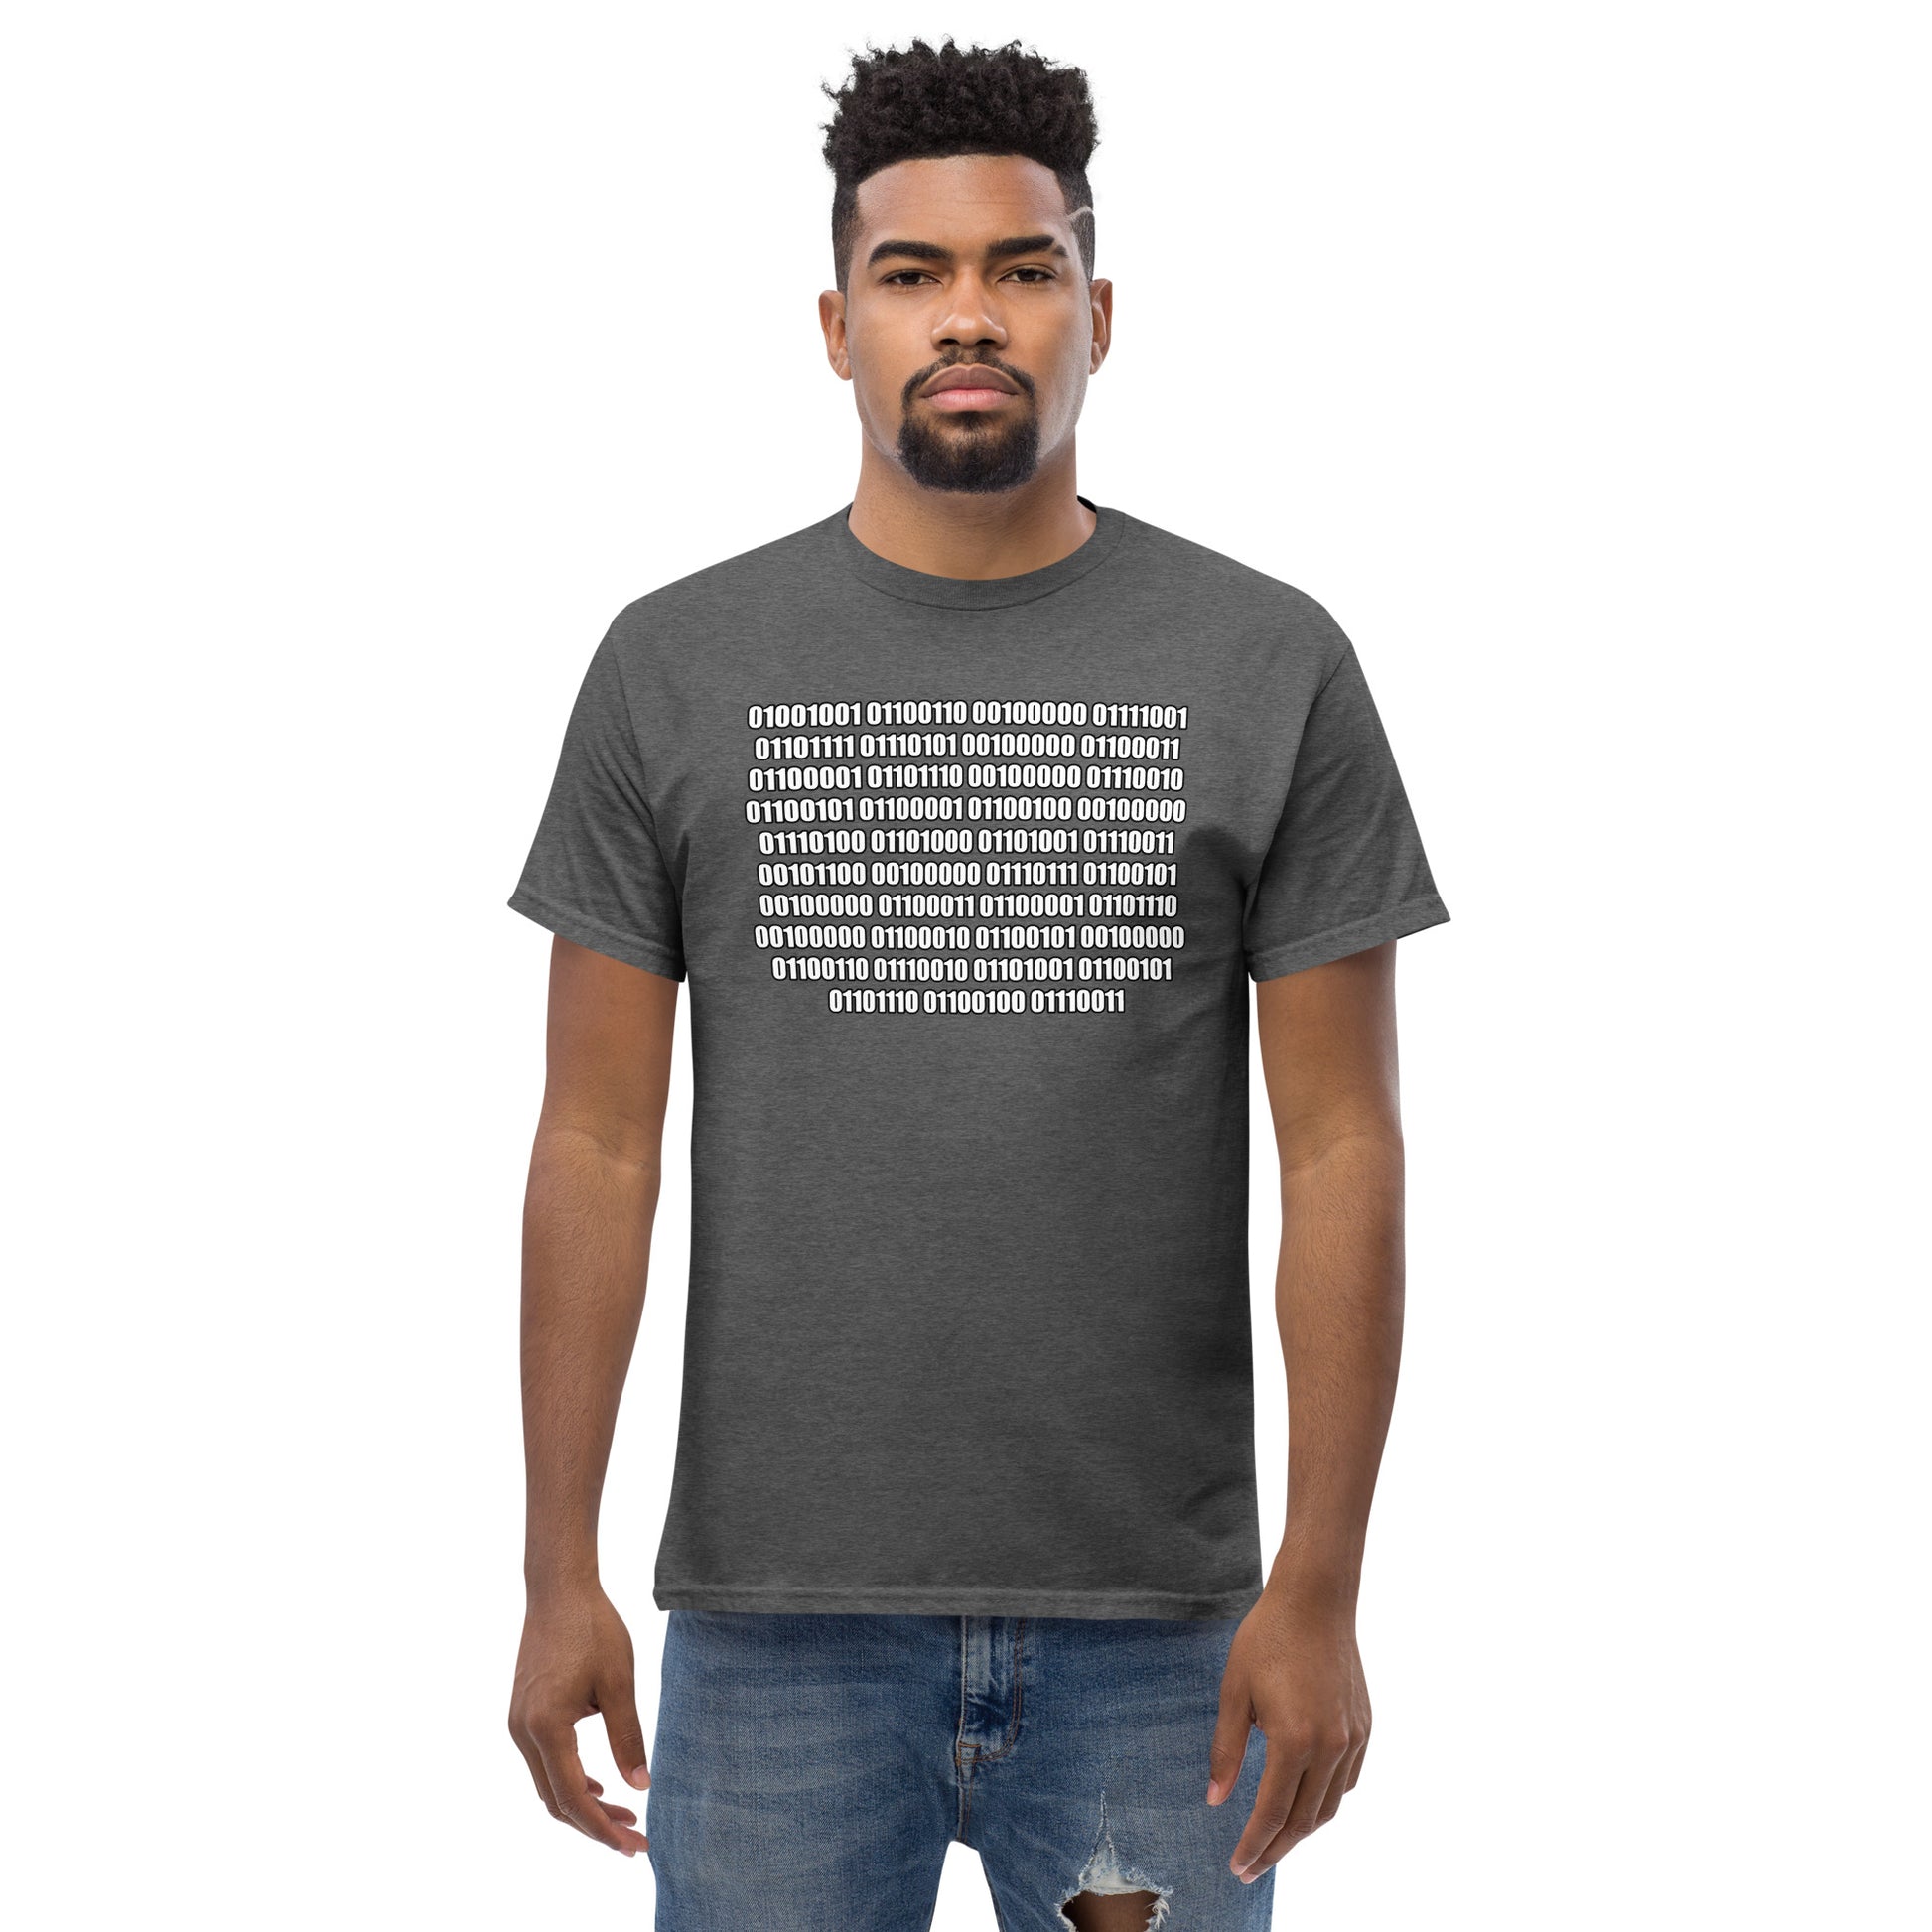 Men with dark heather t-shirt with binaire text "If you can read this"